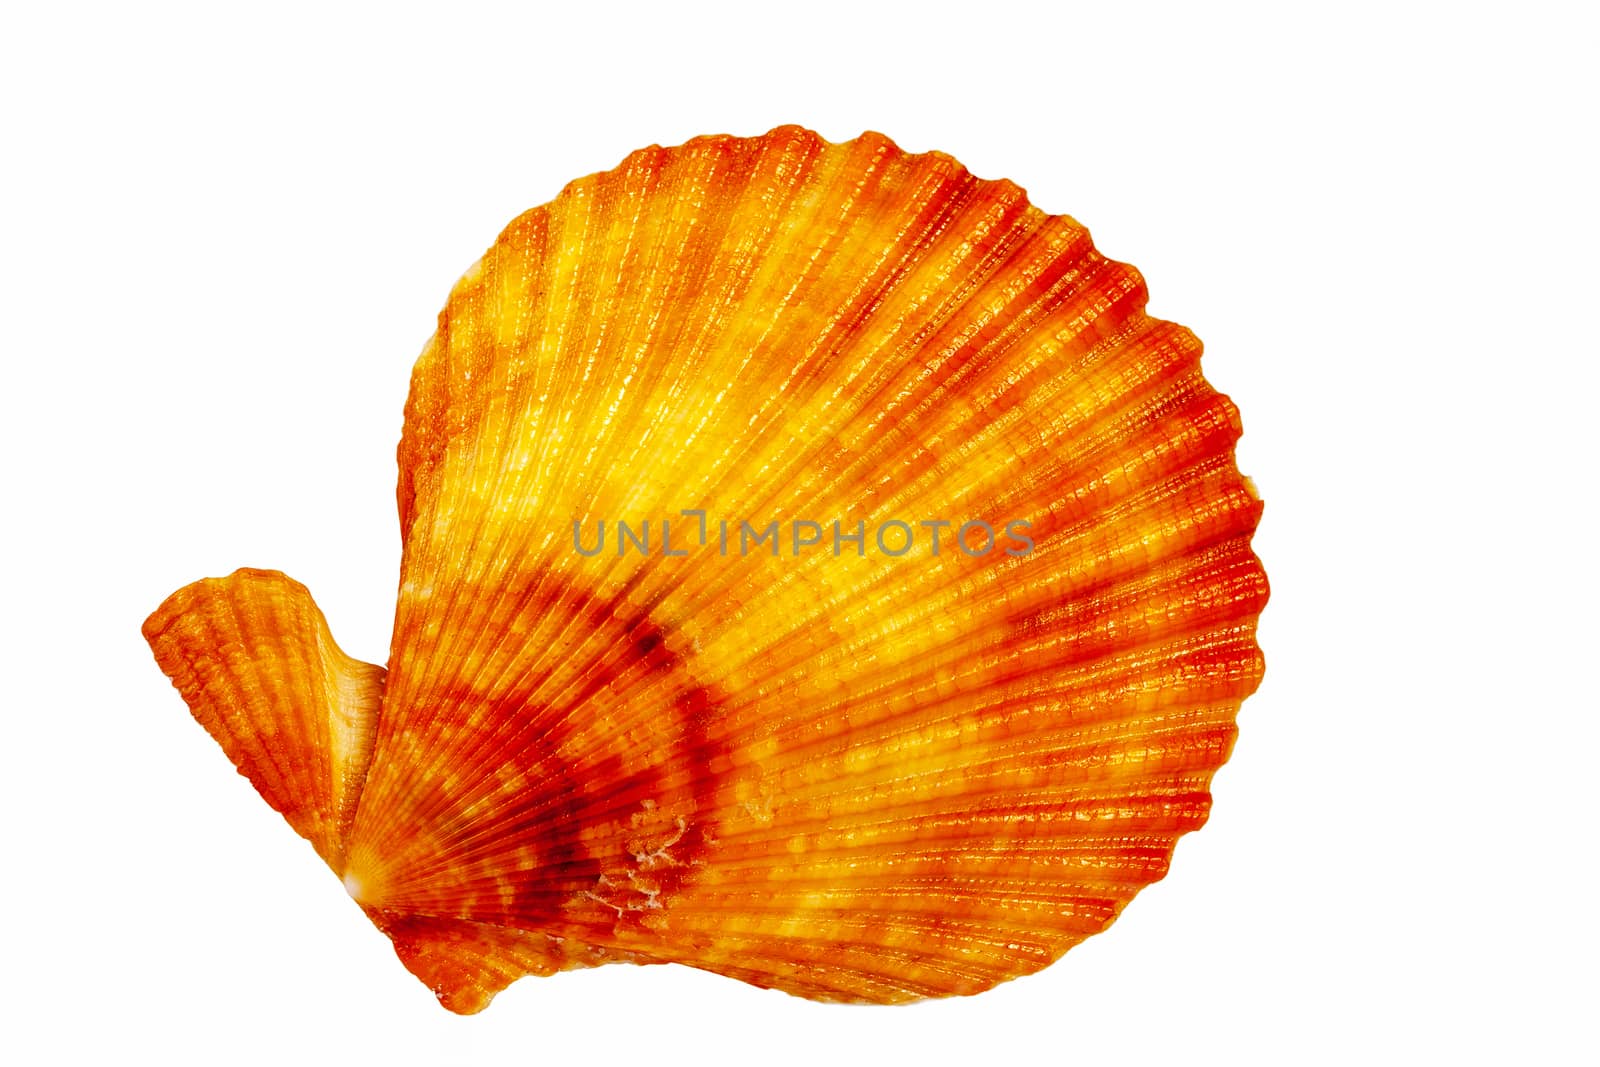 Sea shell of mollusk isolated on white background, close up